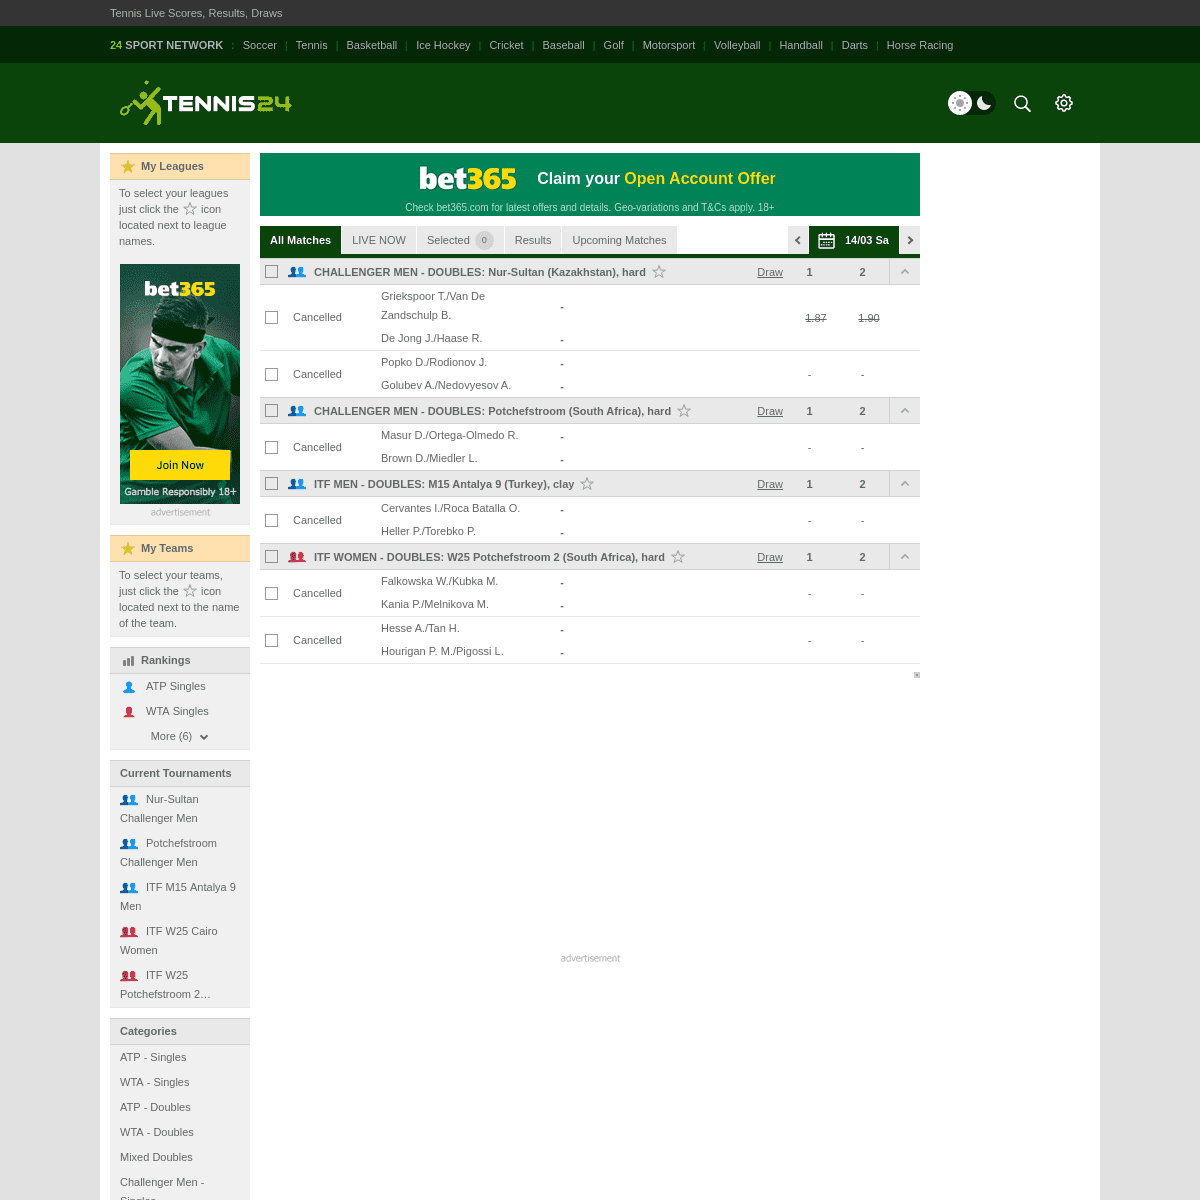 A complete backup of tennis24.com